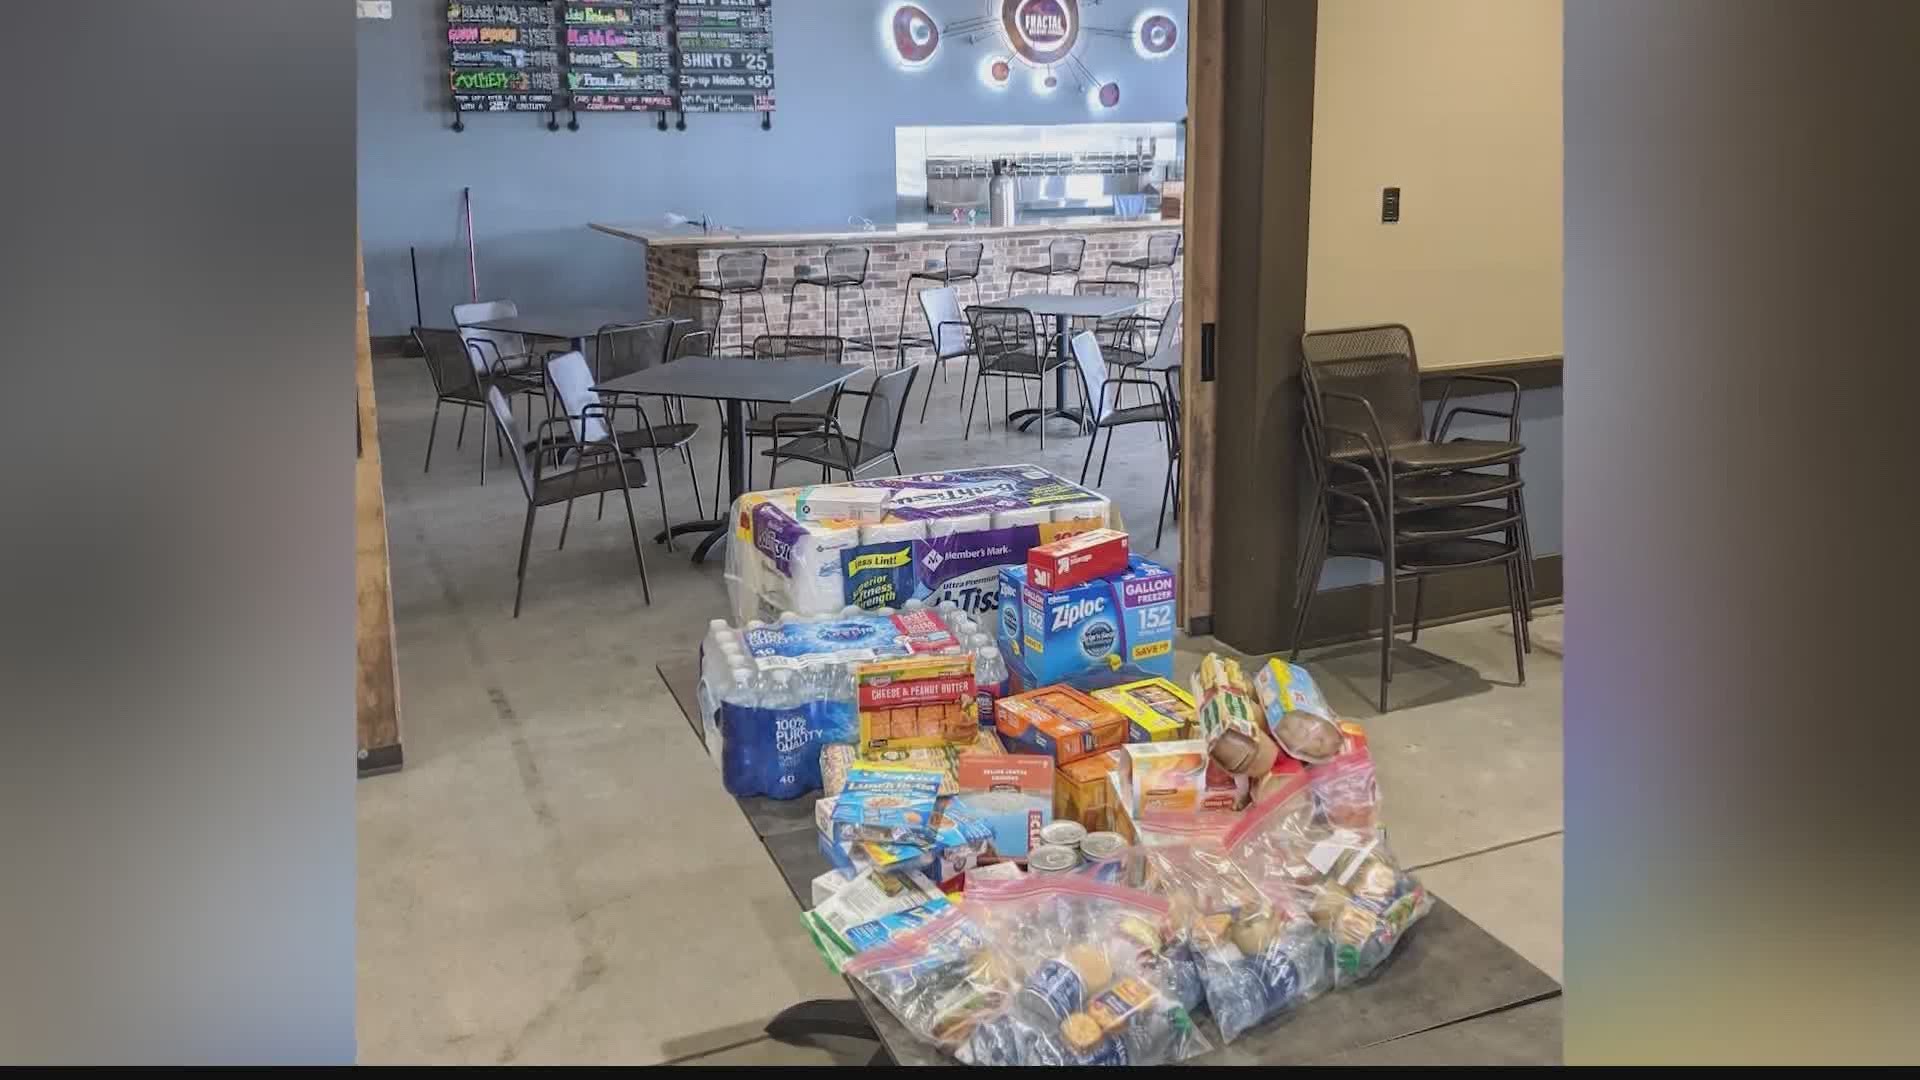 First Stop helps feed Huntsville's homeless, but due to the pandemic, they were required to suspend operations at their facility.